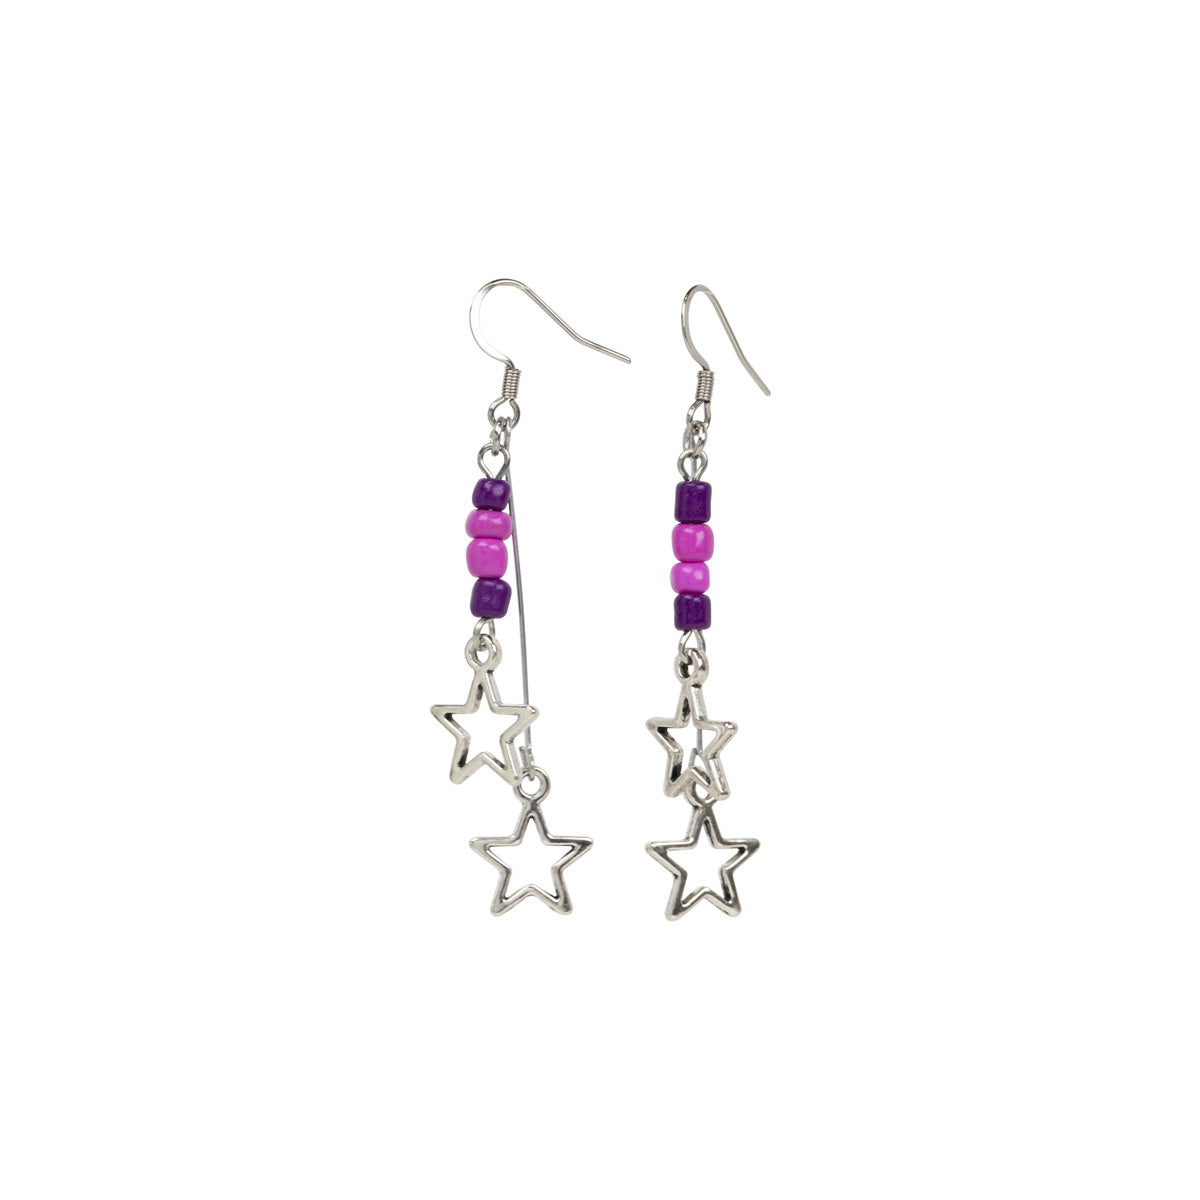 Star earrings with beads